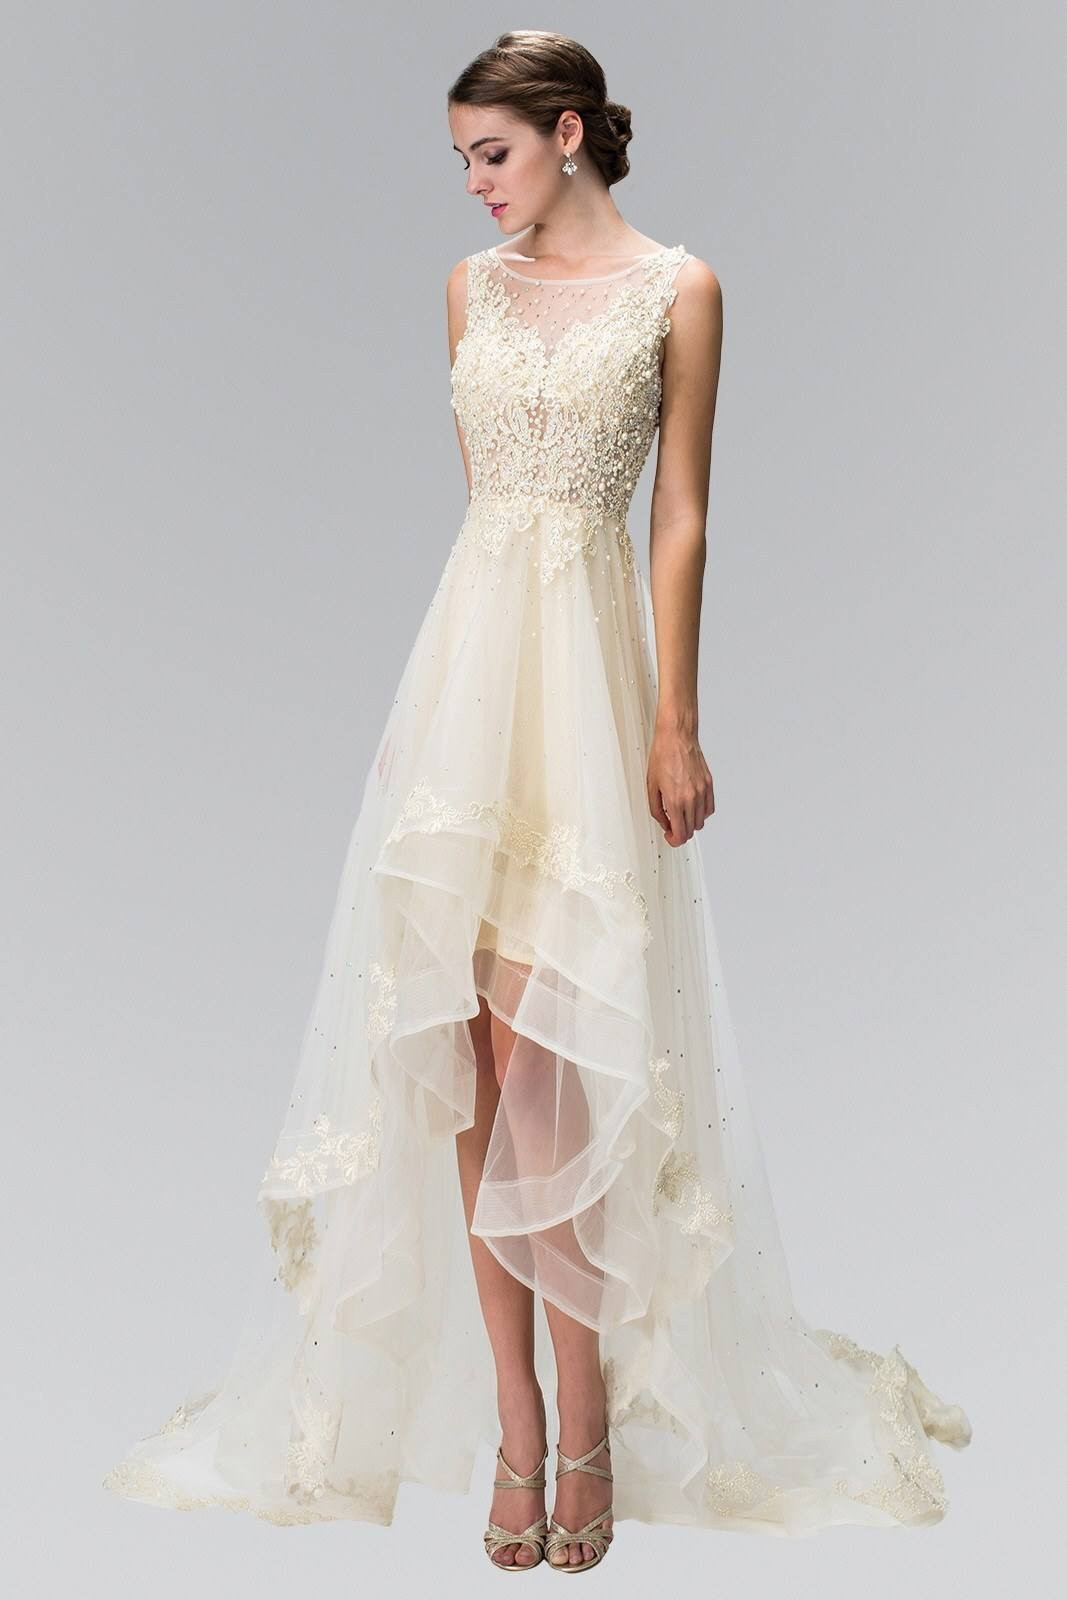 Casual Wedding Dresses For Summer
 Simple Informal Wedding Dresses For Summer Casual Wedding